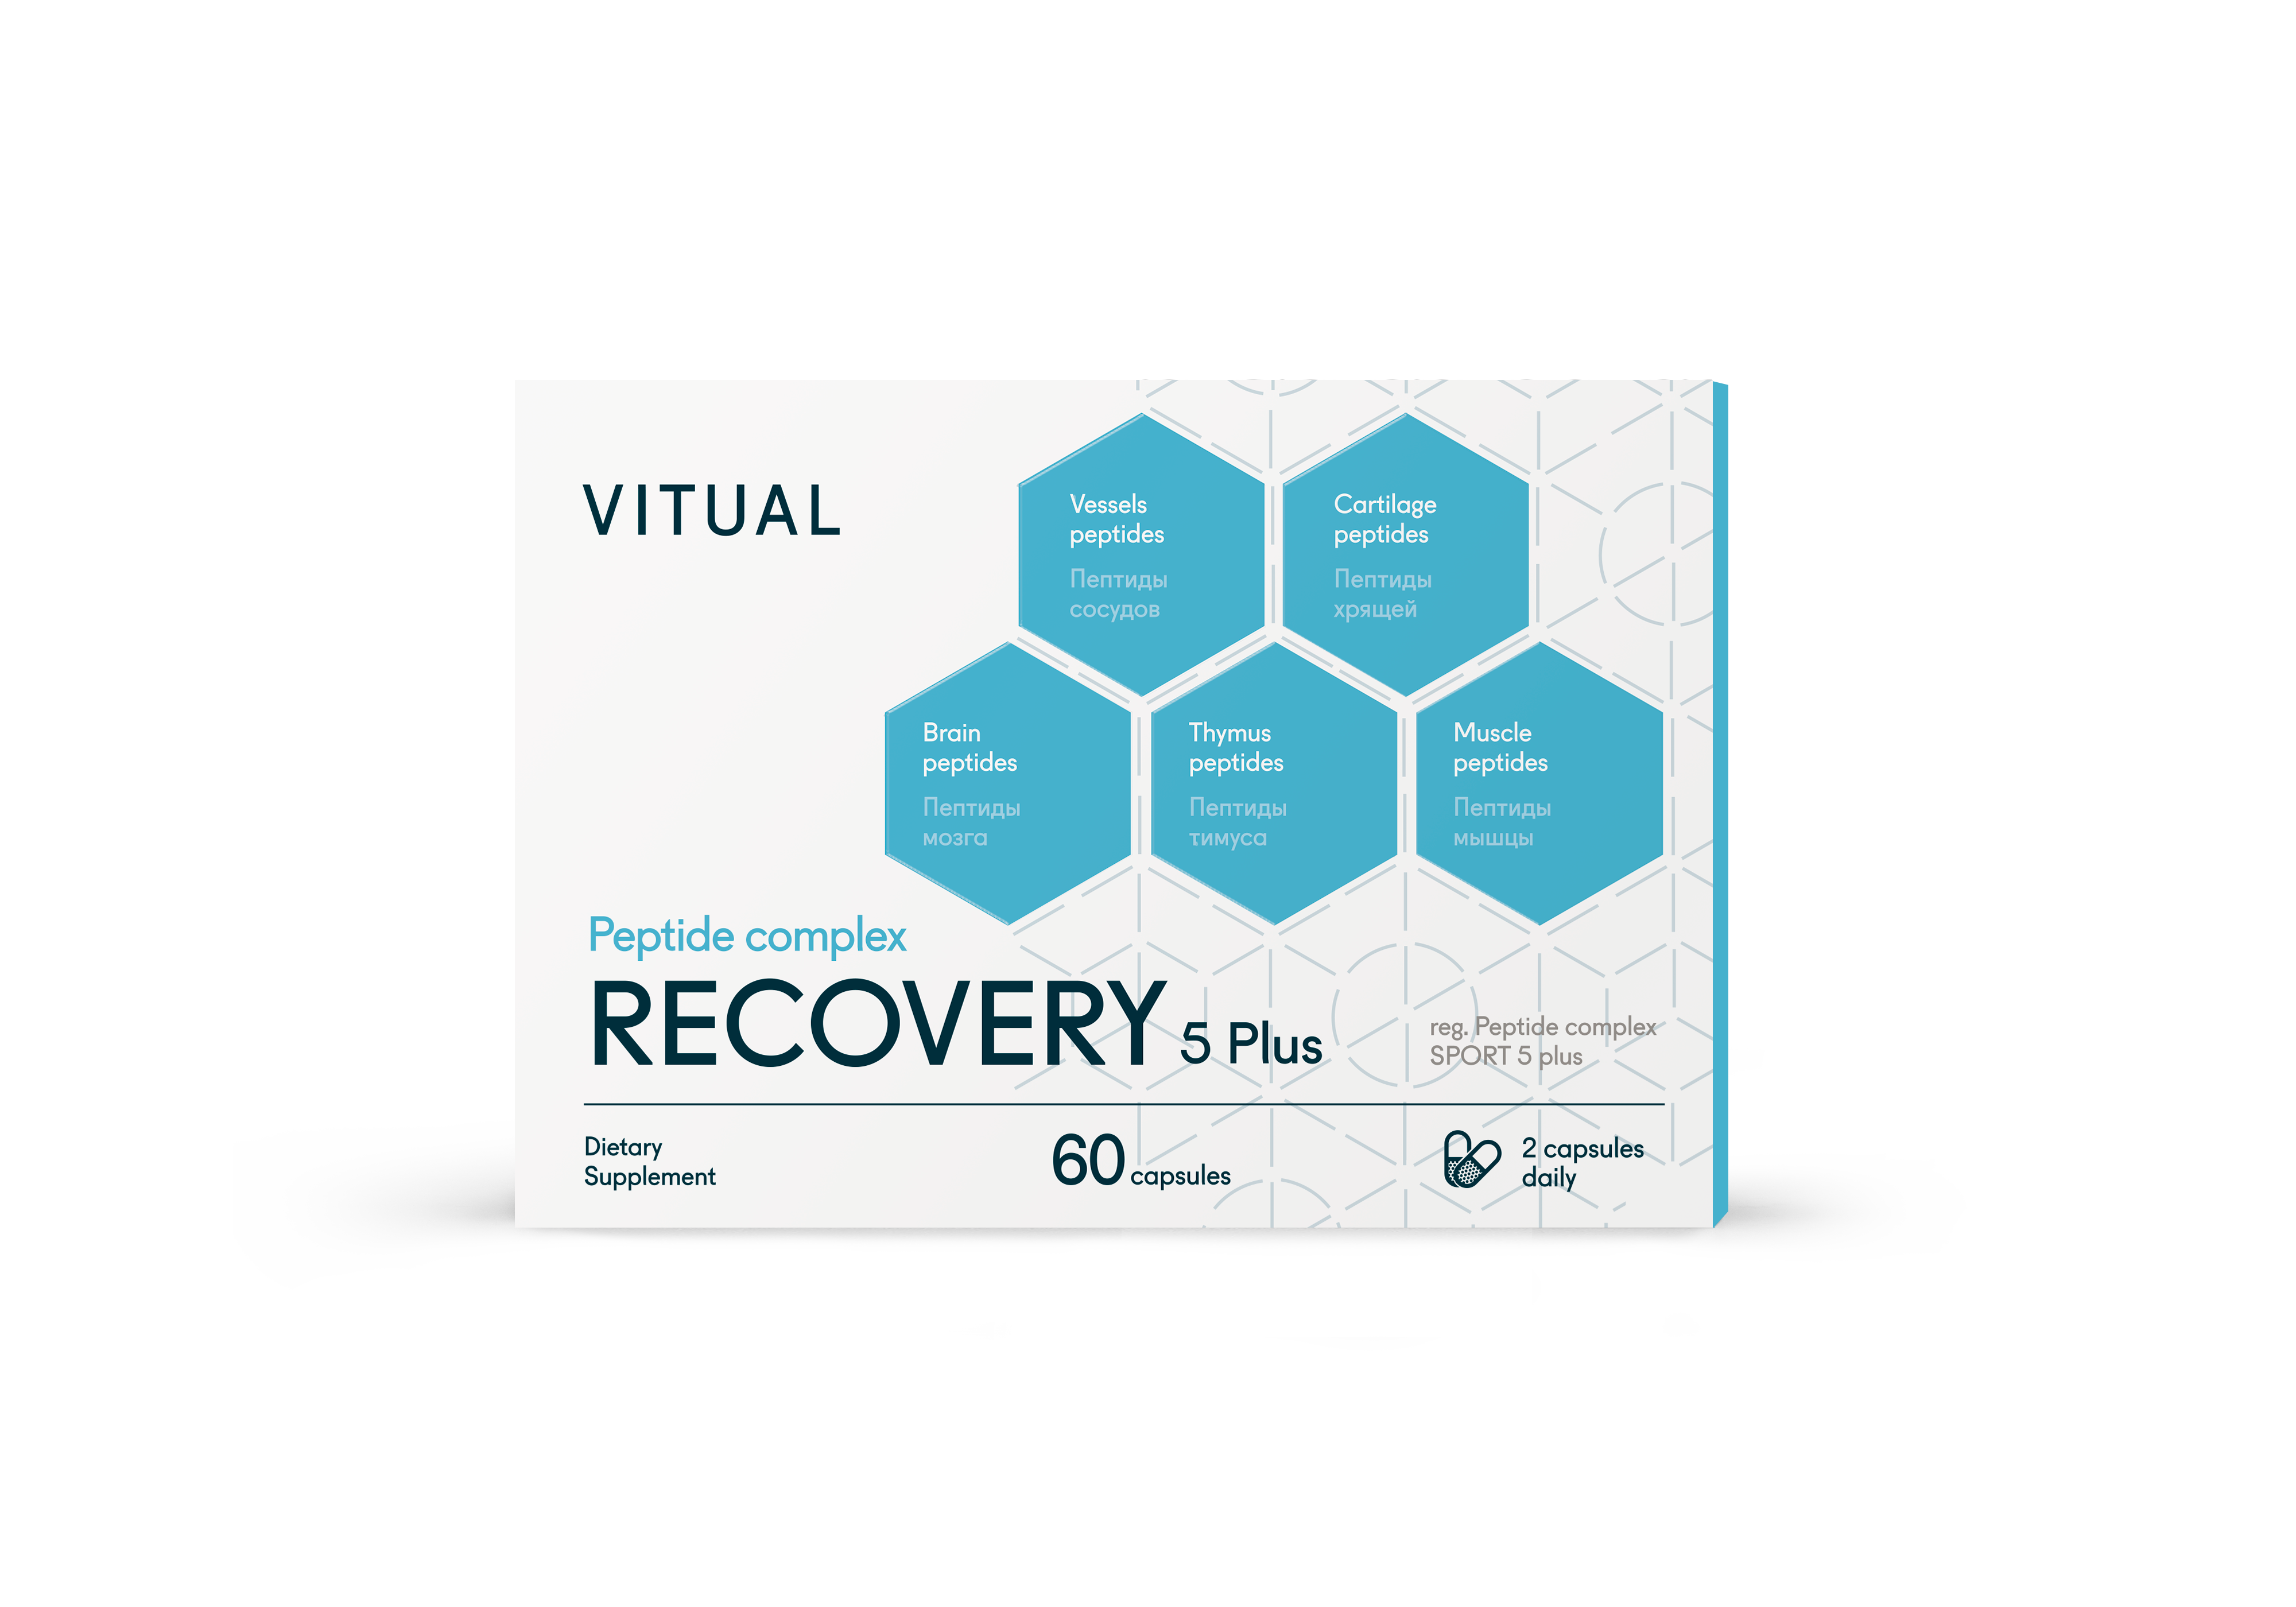 RECOVERY 5 plus